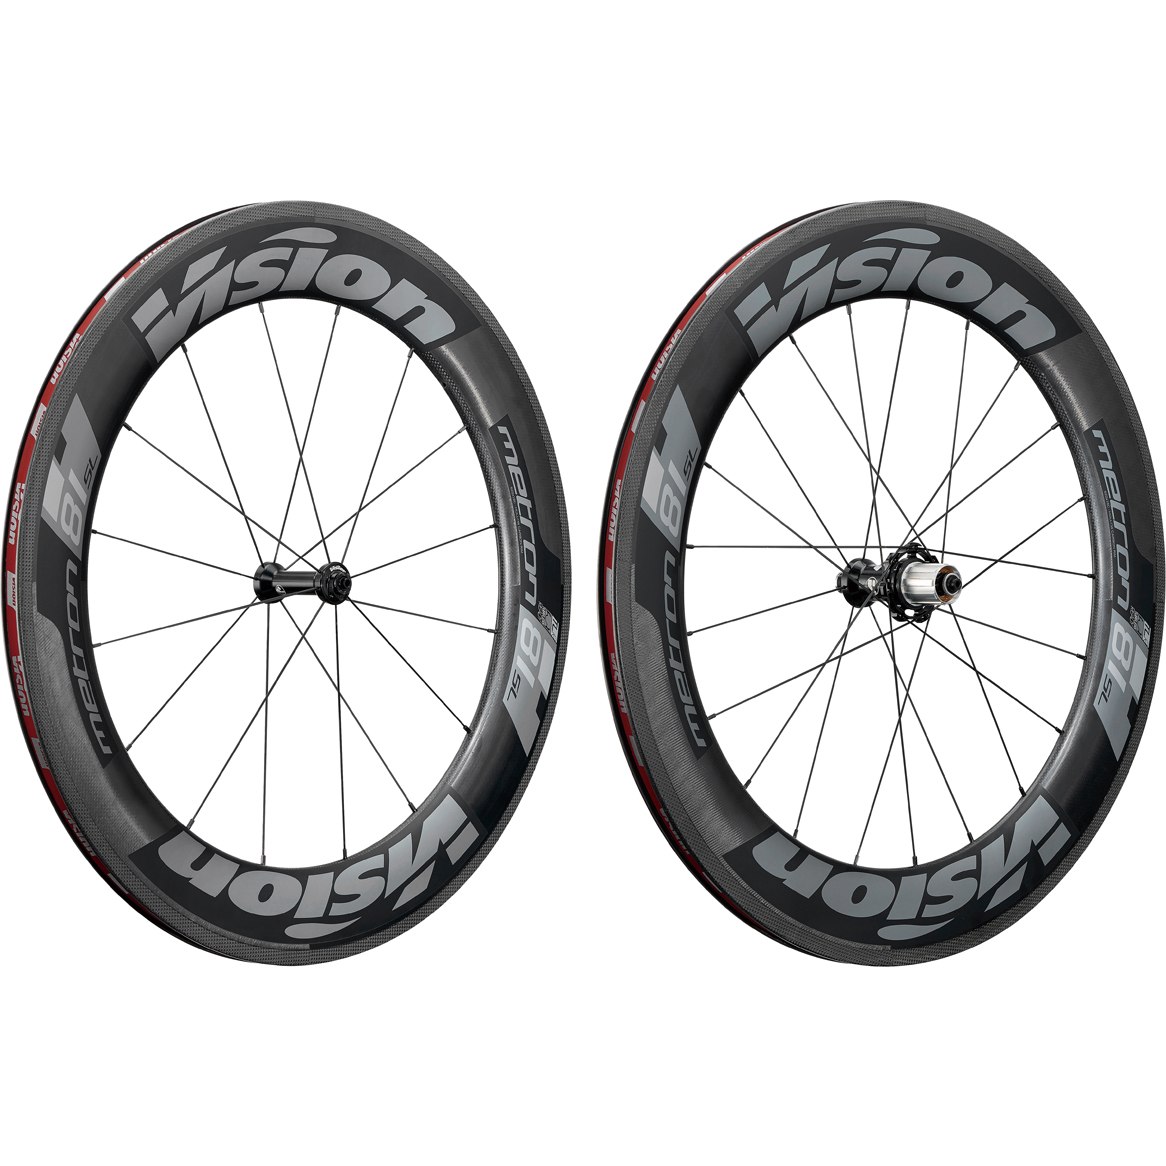 Picture of Vision Metron 81 SL Carbon Wheelset - Tubeless Ready - Clincher - SRAM XDR